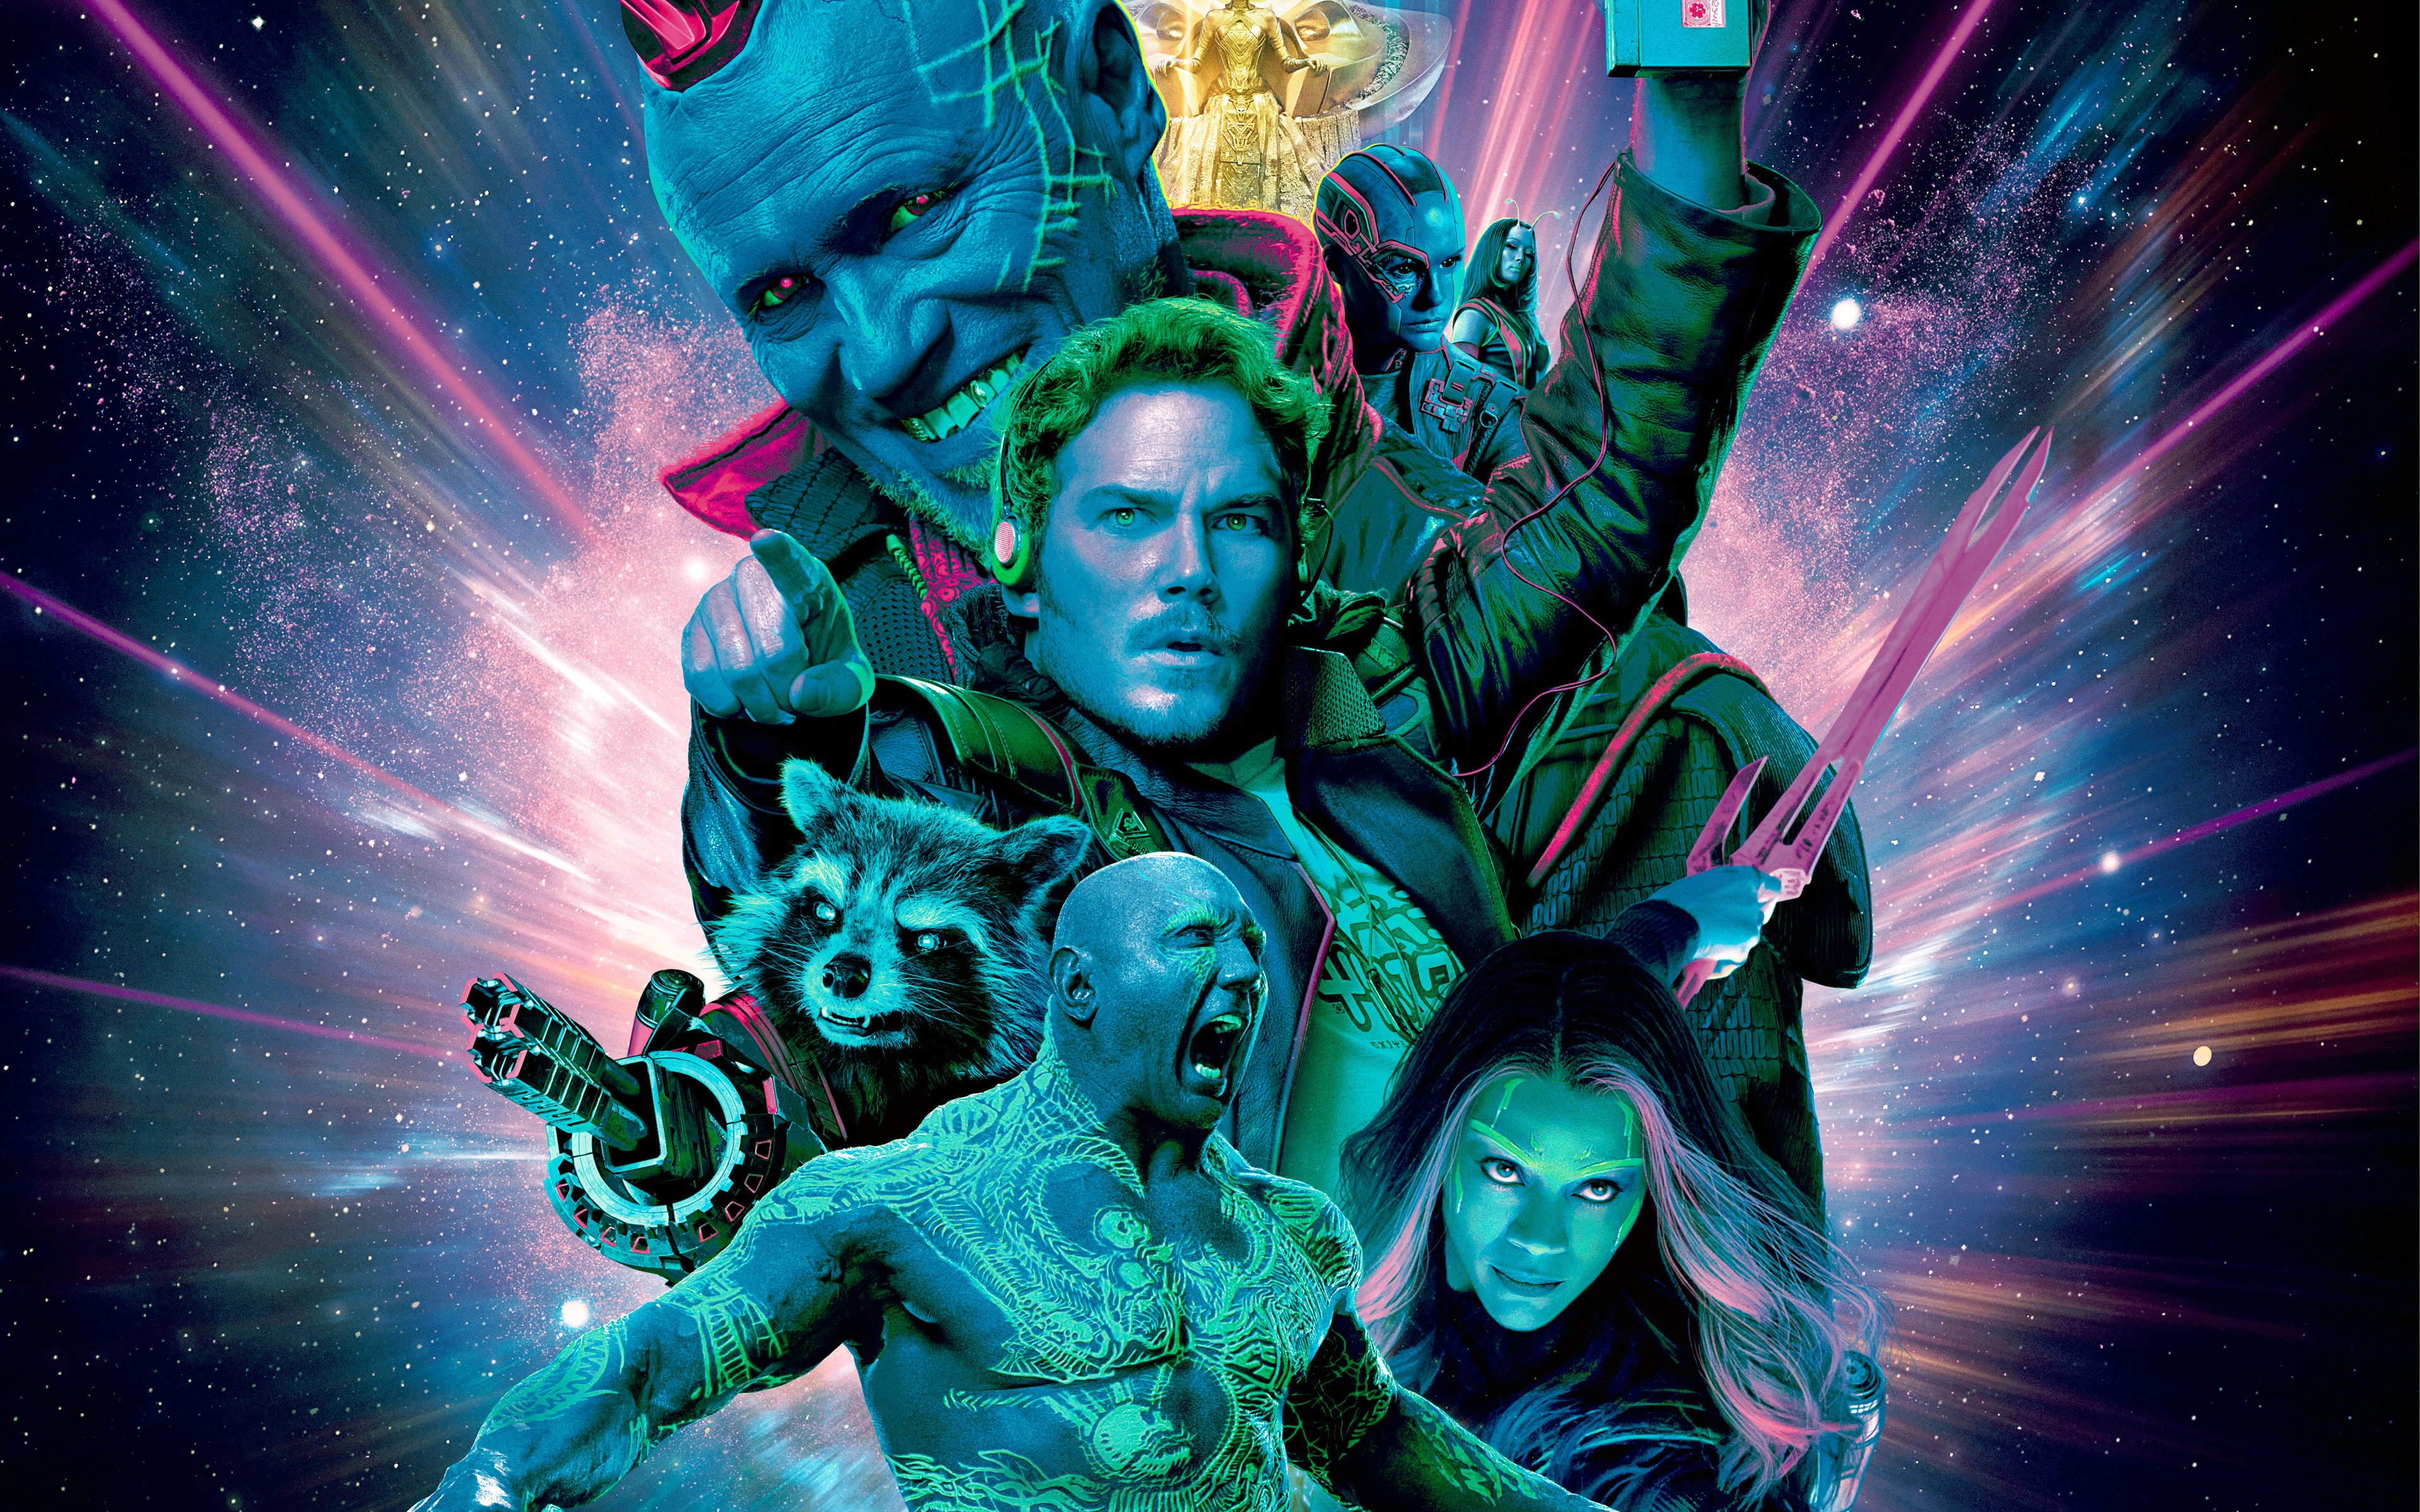 instal the new version for iphoneGuardians of the Galaxy Vol 2